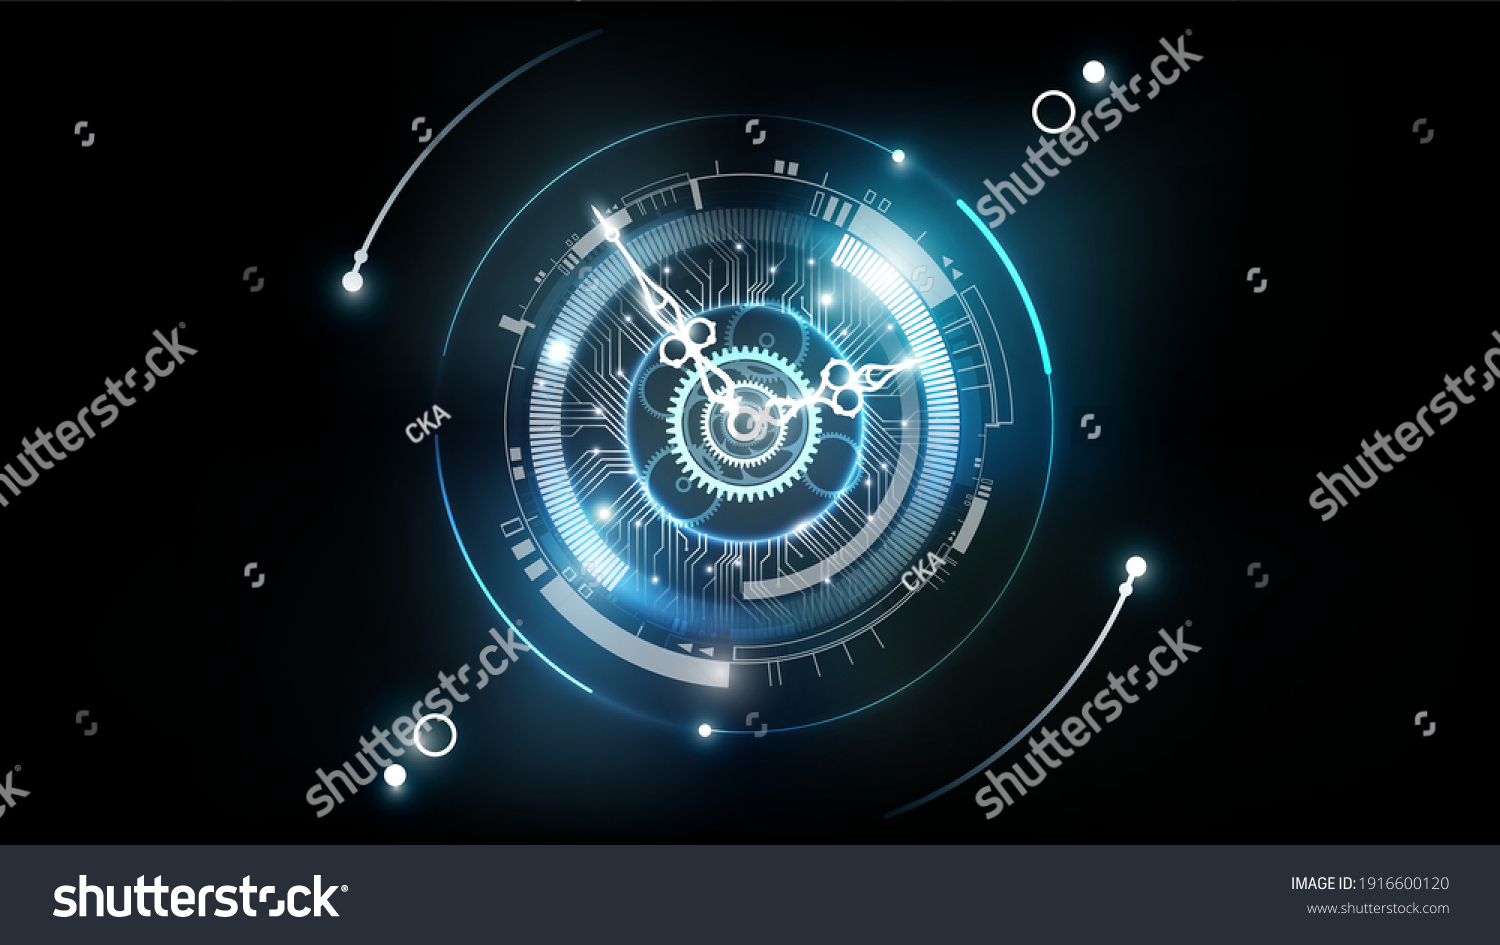 668,170 Circle time Images, Stock Photos & Vectors | Shutterstock